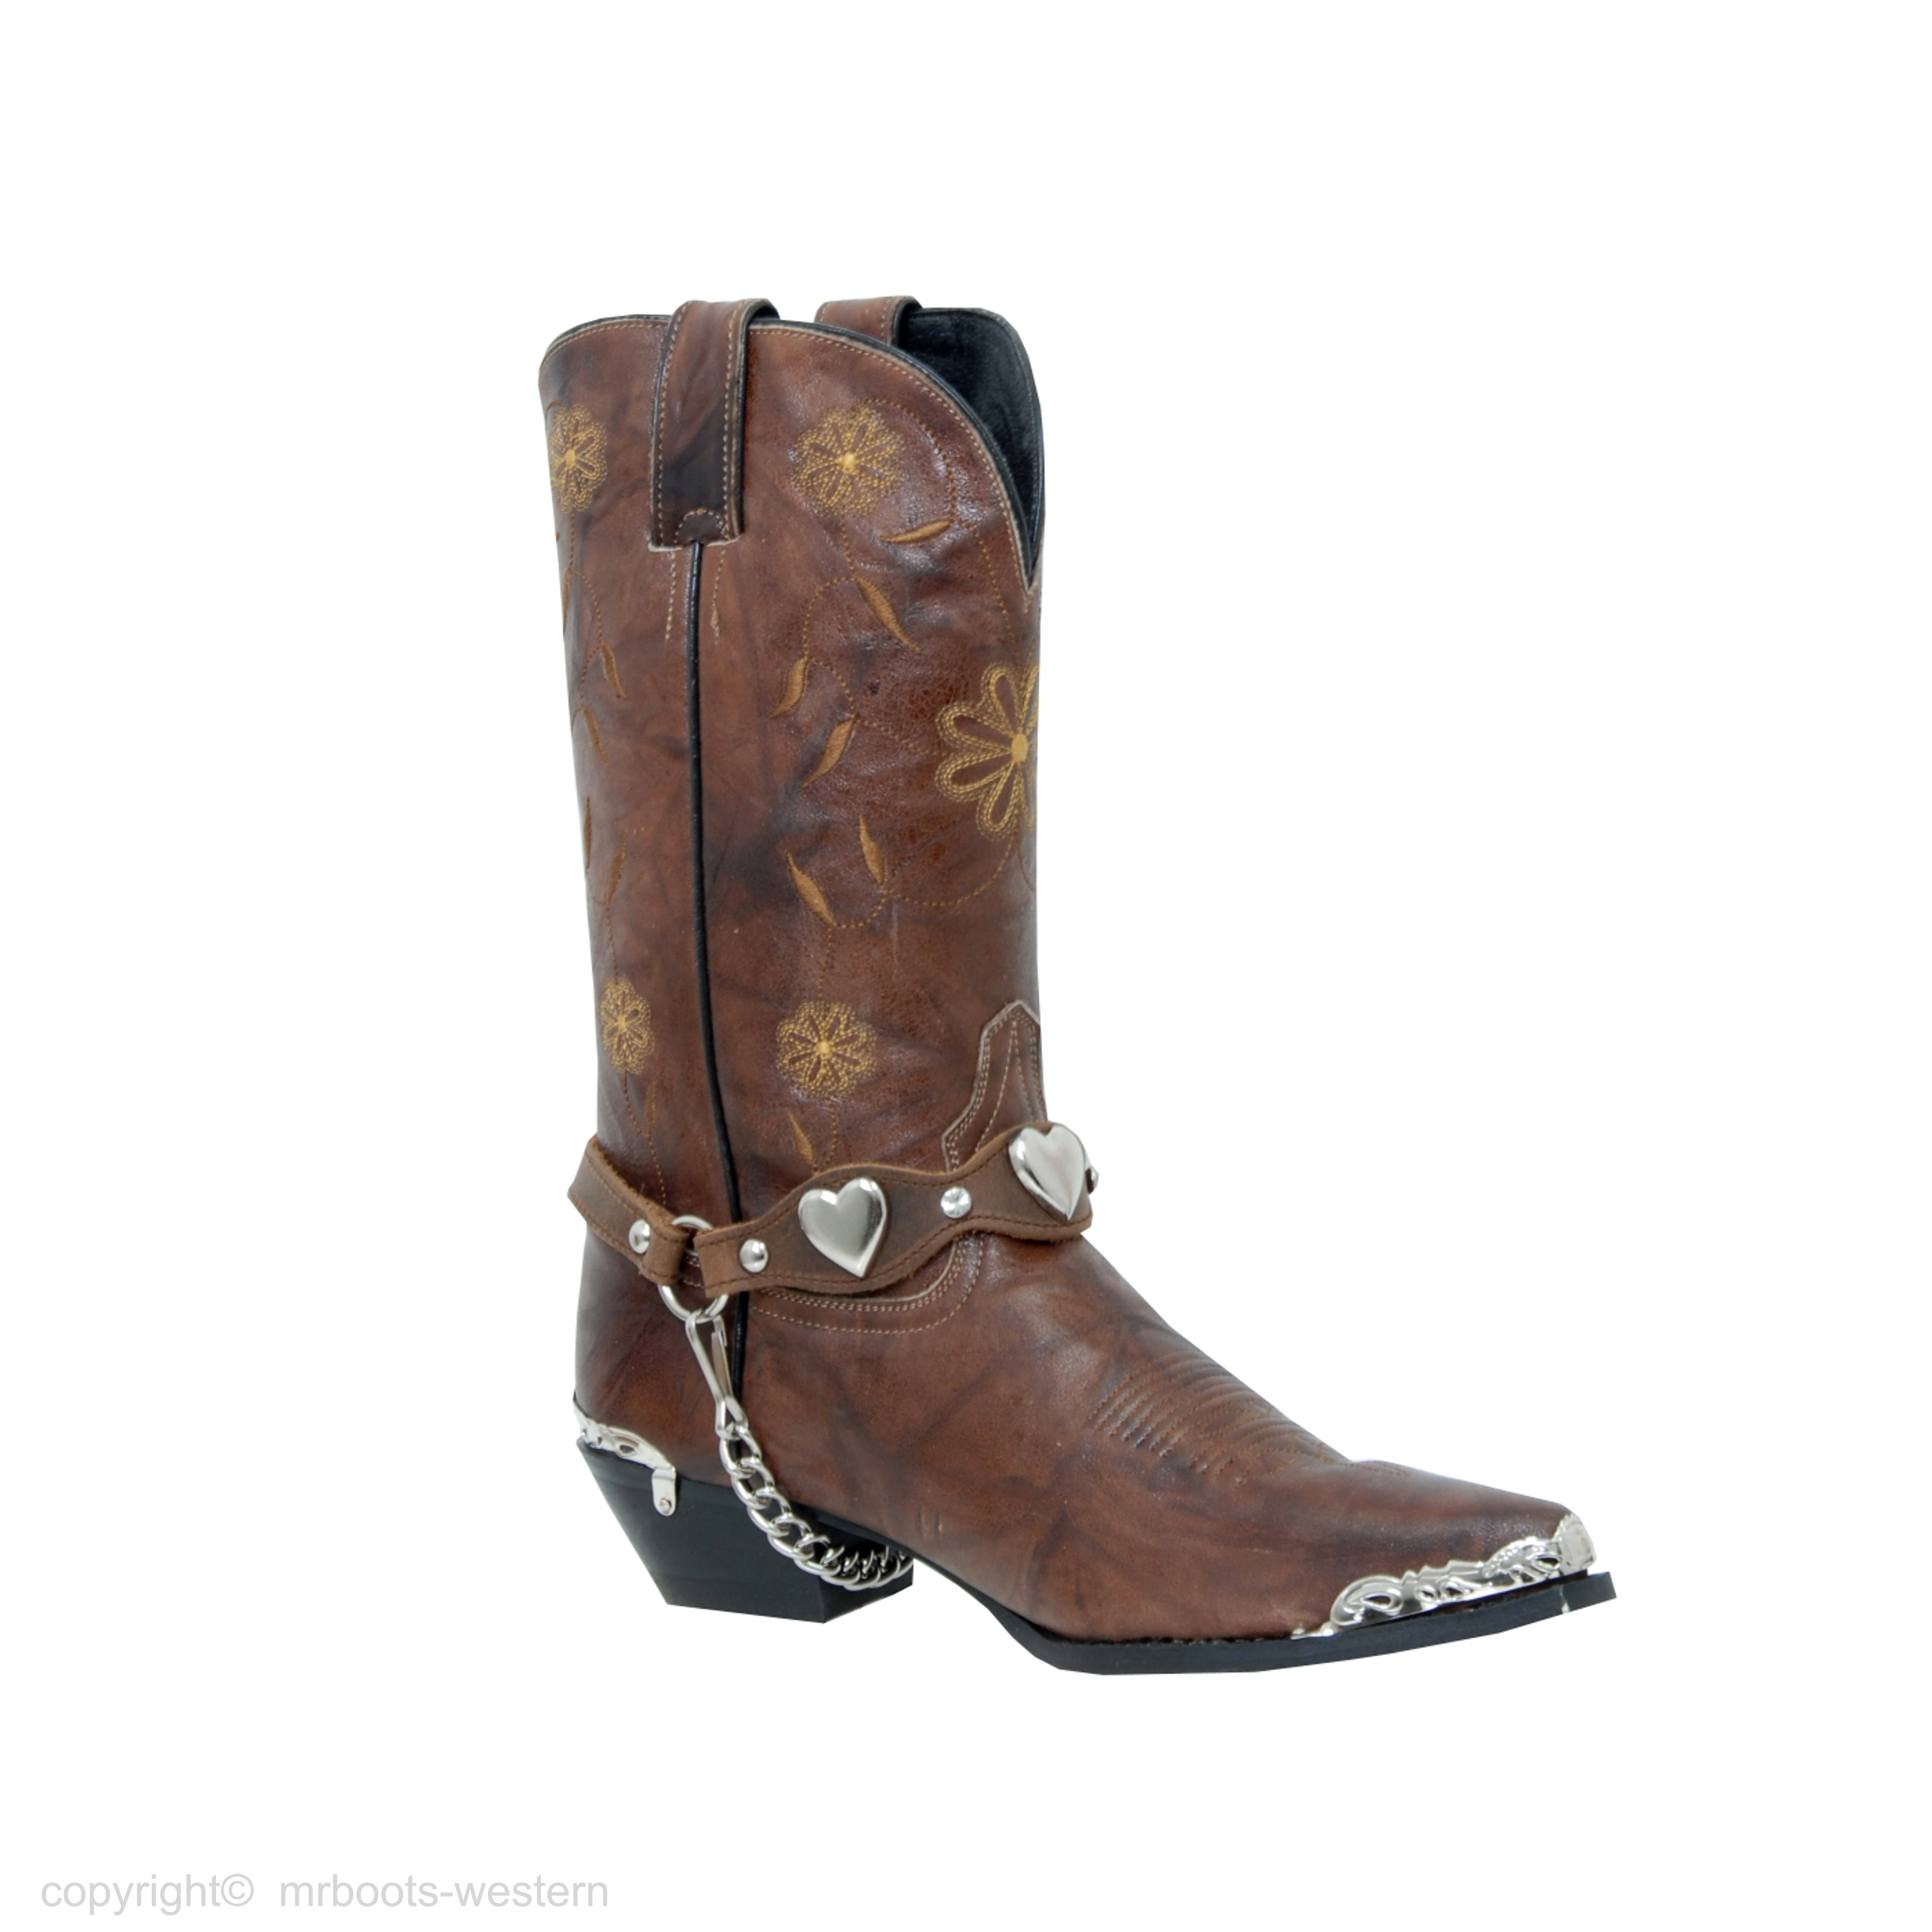 Fashionwest BBR-04 Leather Boot Strap With Conchos